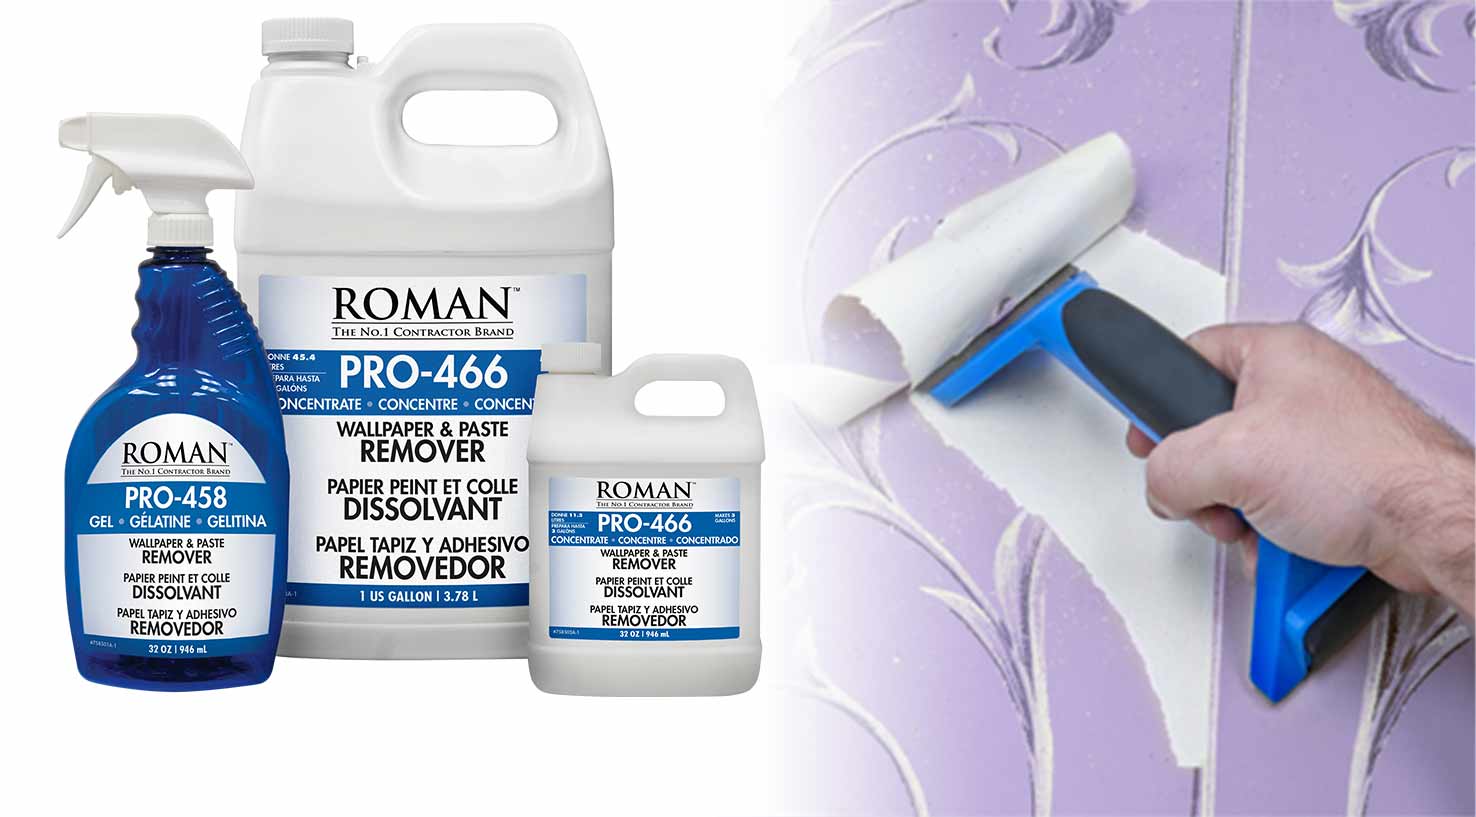 PRO-466 Concentrate Wallpaper Paste Remover - ROMAN Products